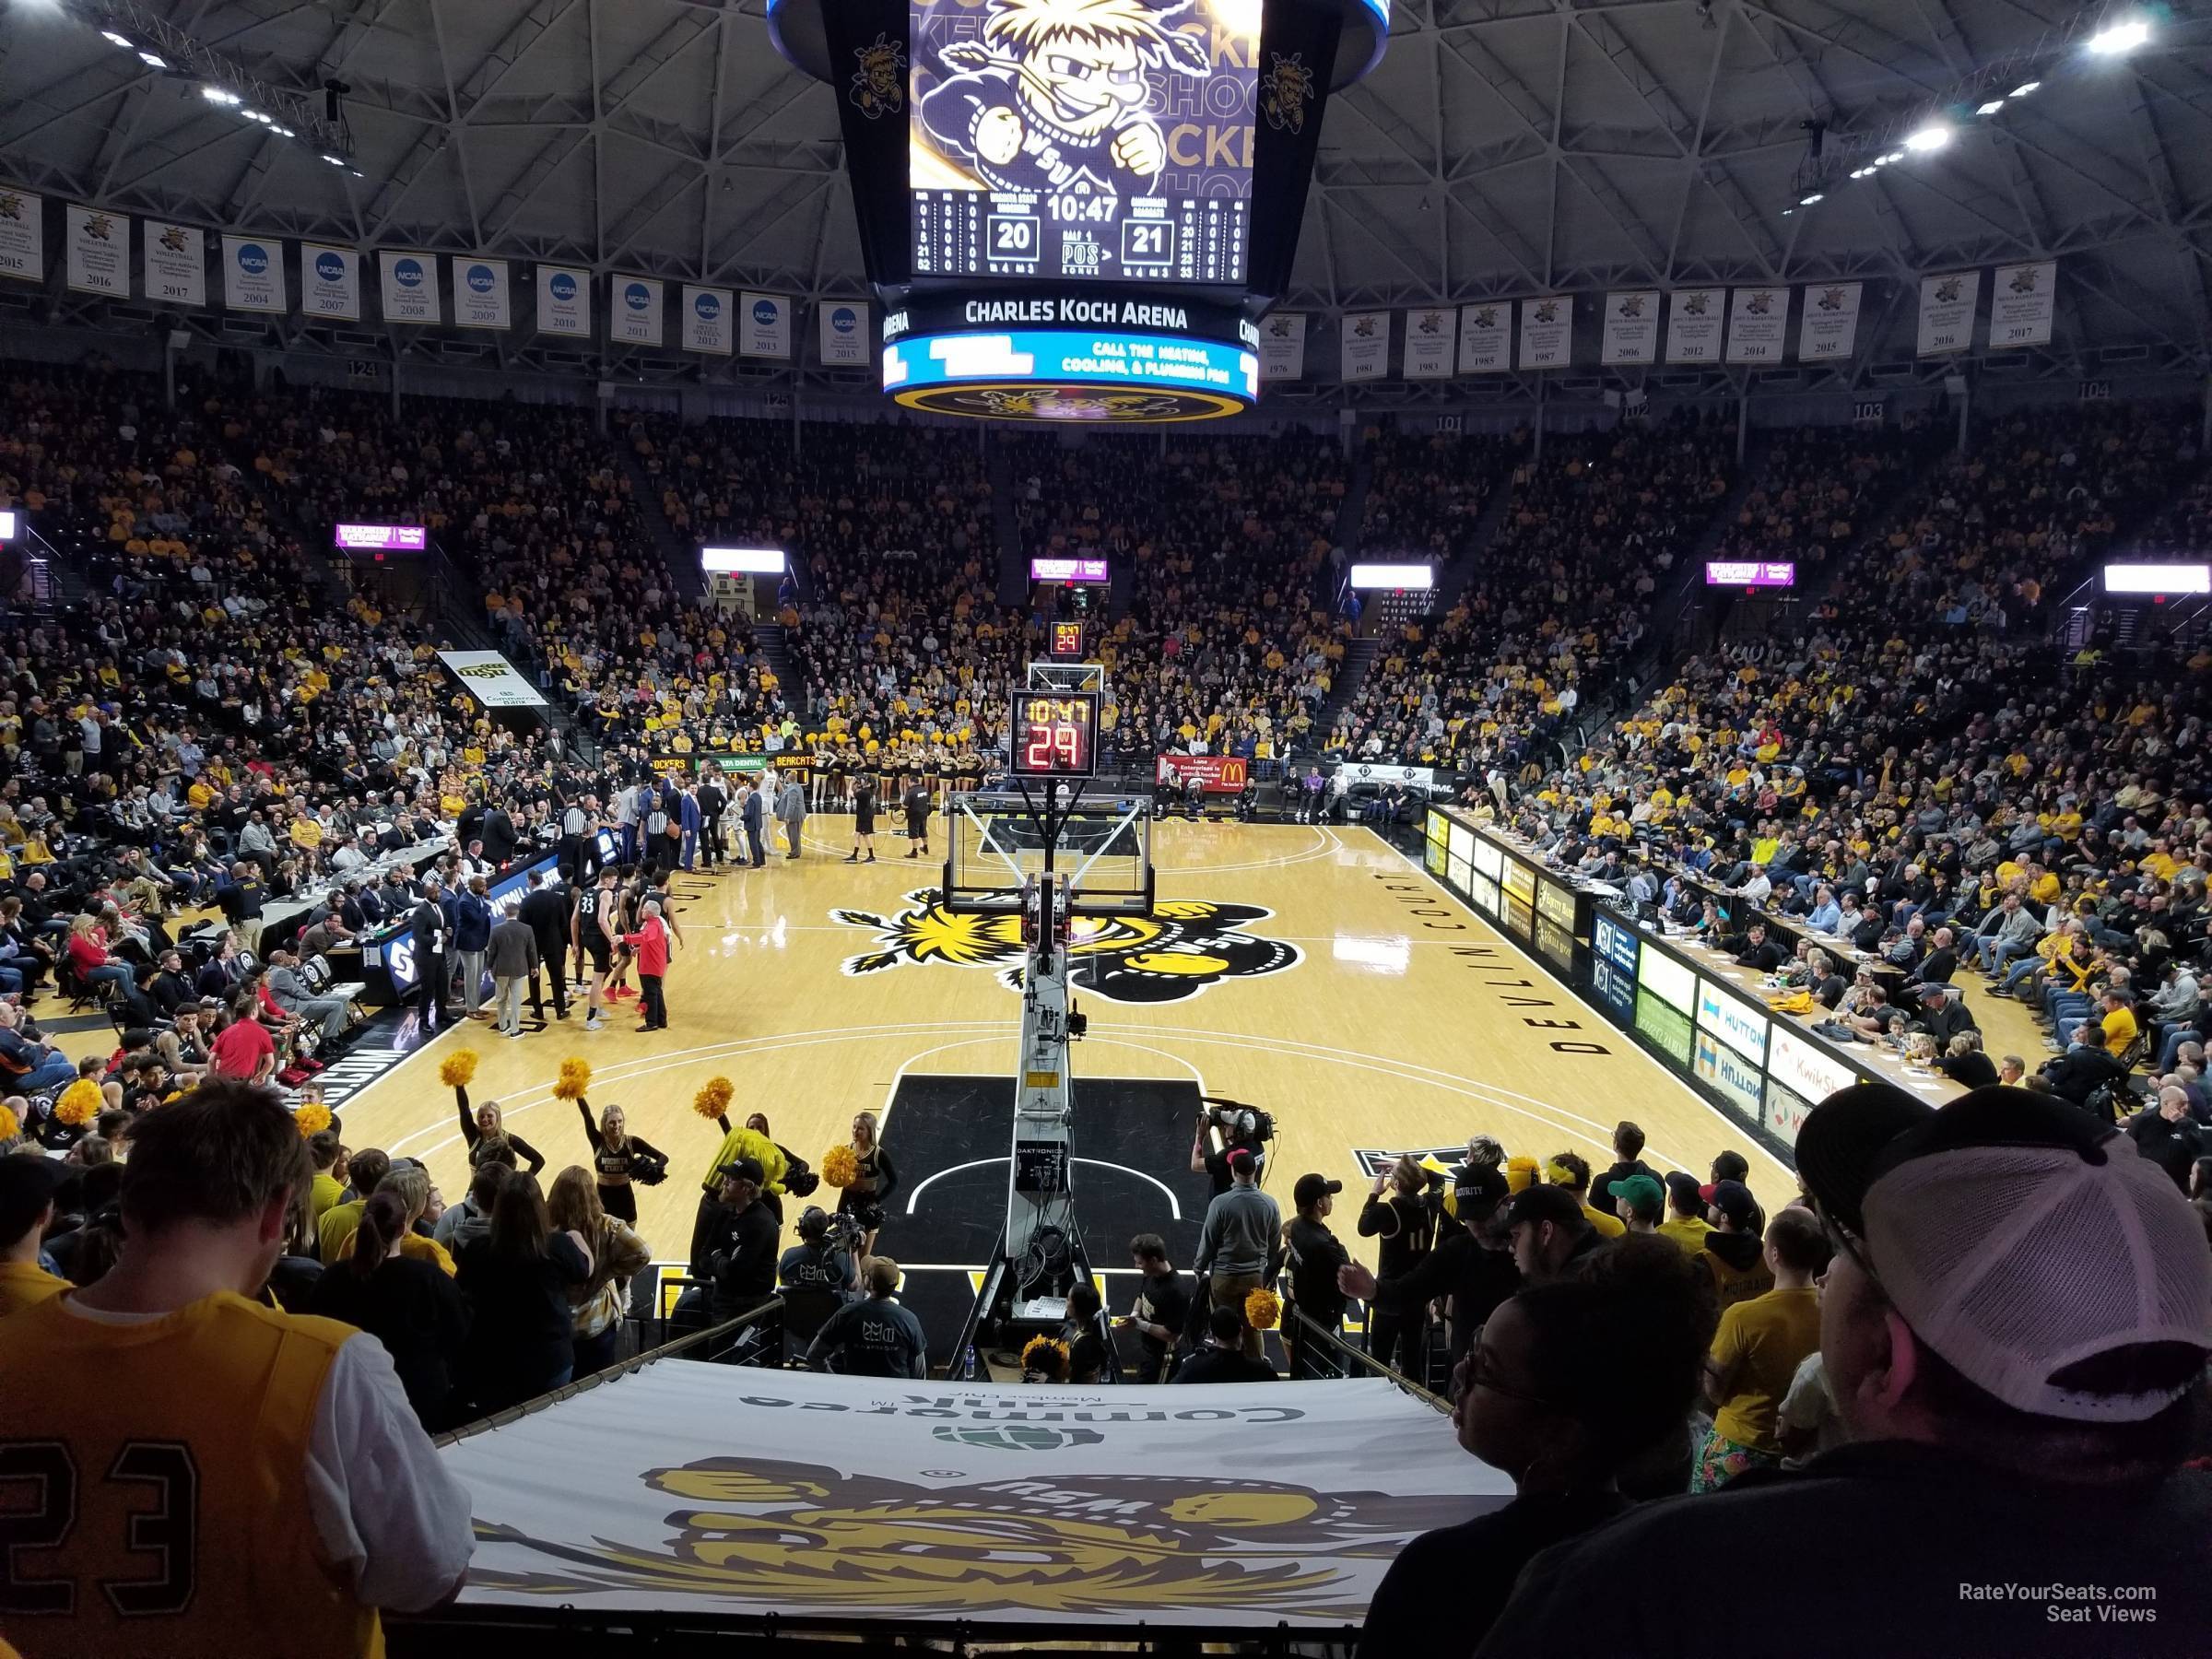 section 116, row 16 seat view  - charles koch arena